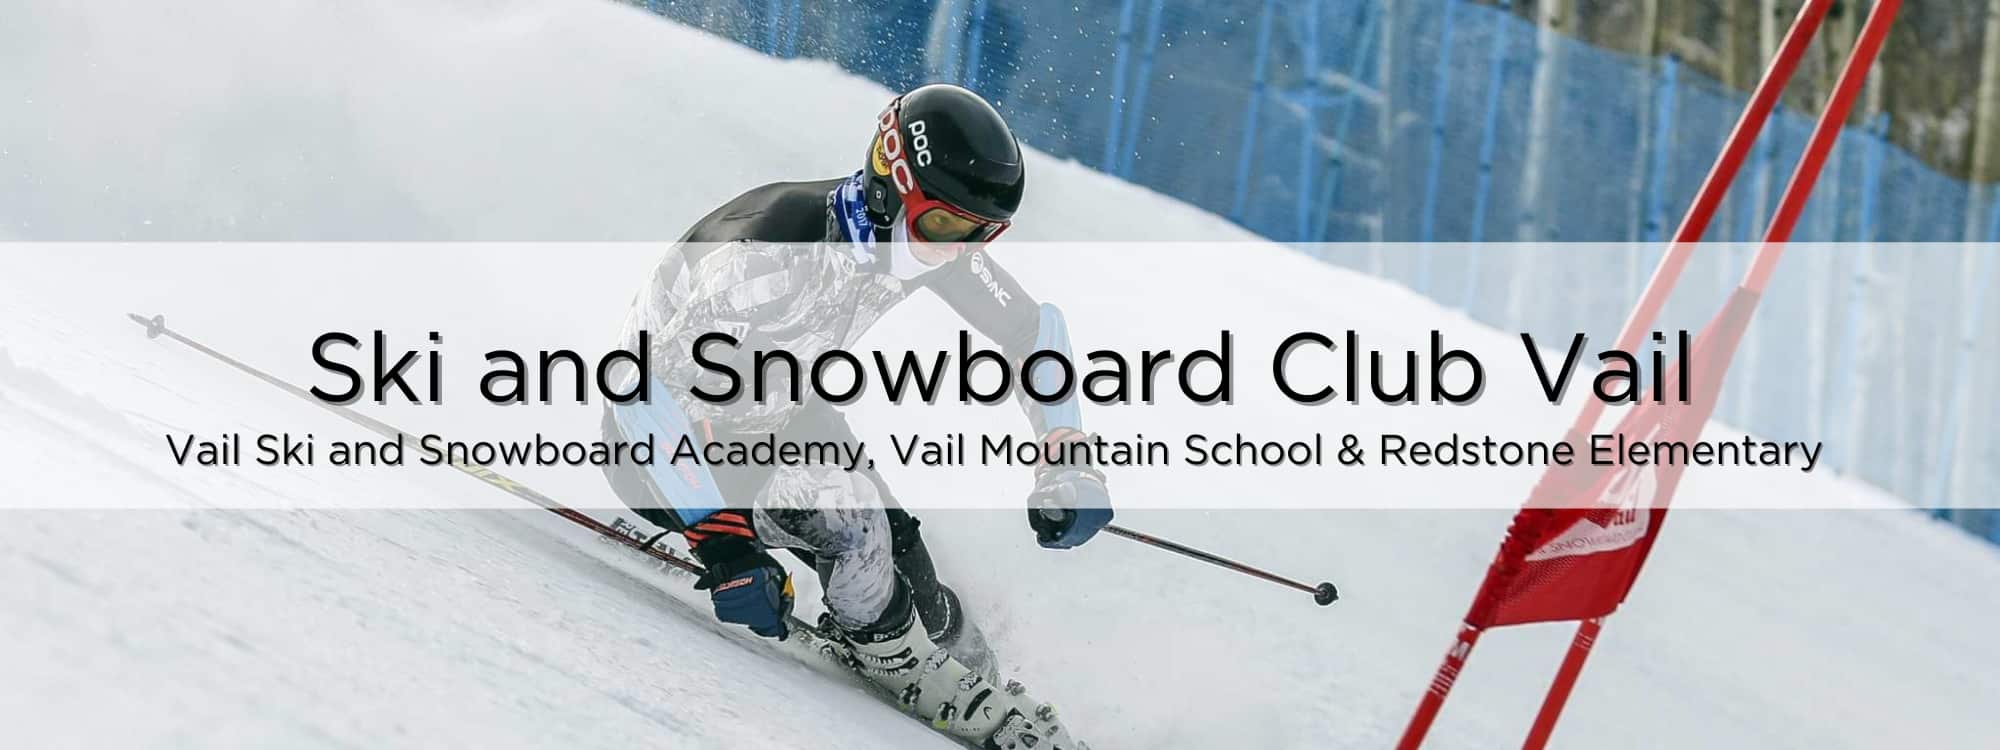 Ski and Snowboard Club Vail athletes have the ability to attend VMS, Redstone, and Vail Ski and Snowboard Academy. Title and Banner.